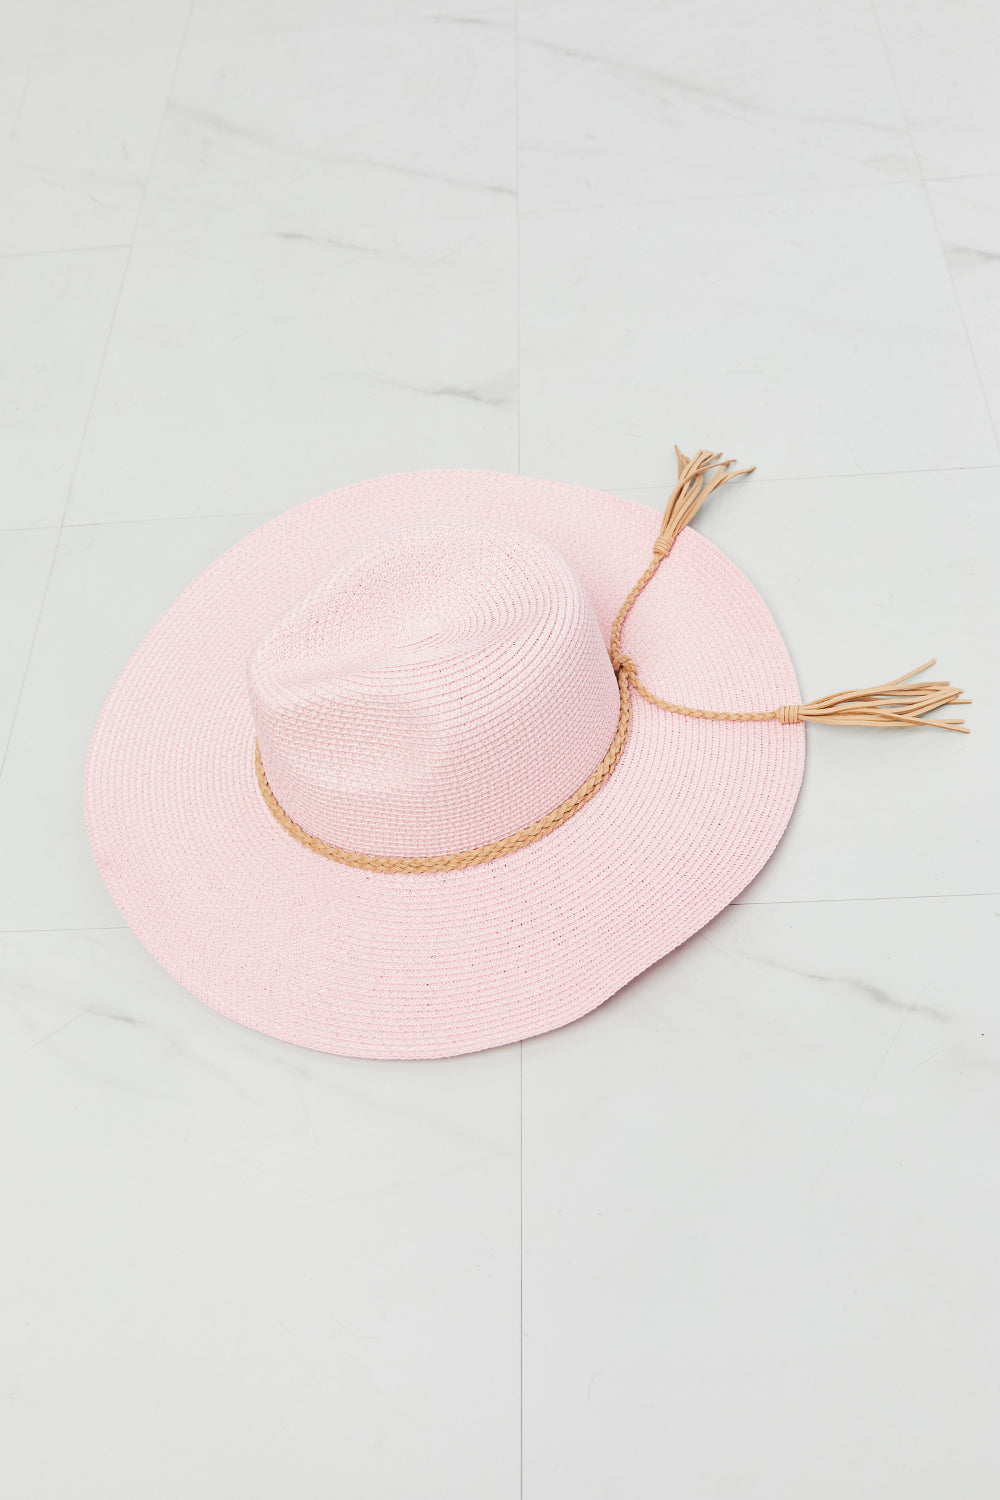 Rancher Straw Hat: A rustic and stylish hat crafted from straw, reminiscent of the classic rancher's headwear, ideal for a Western-inspired look.